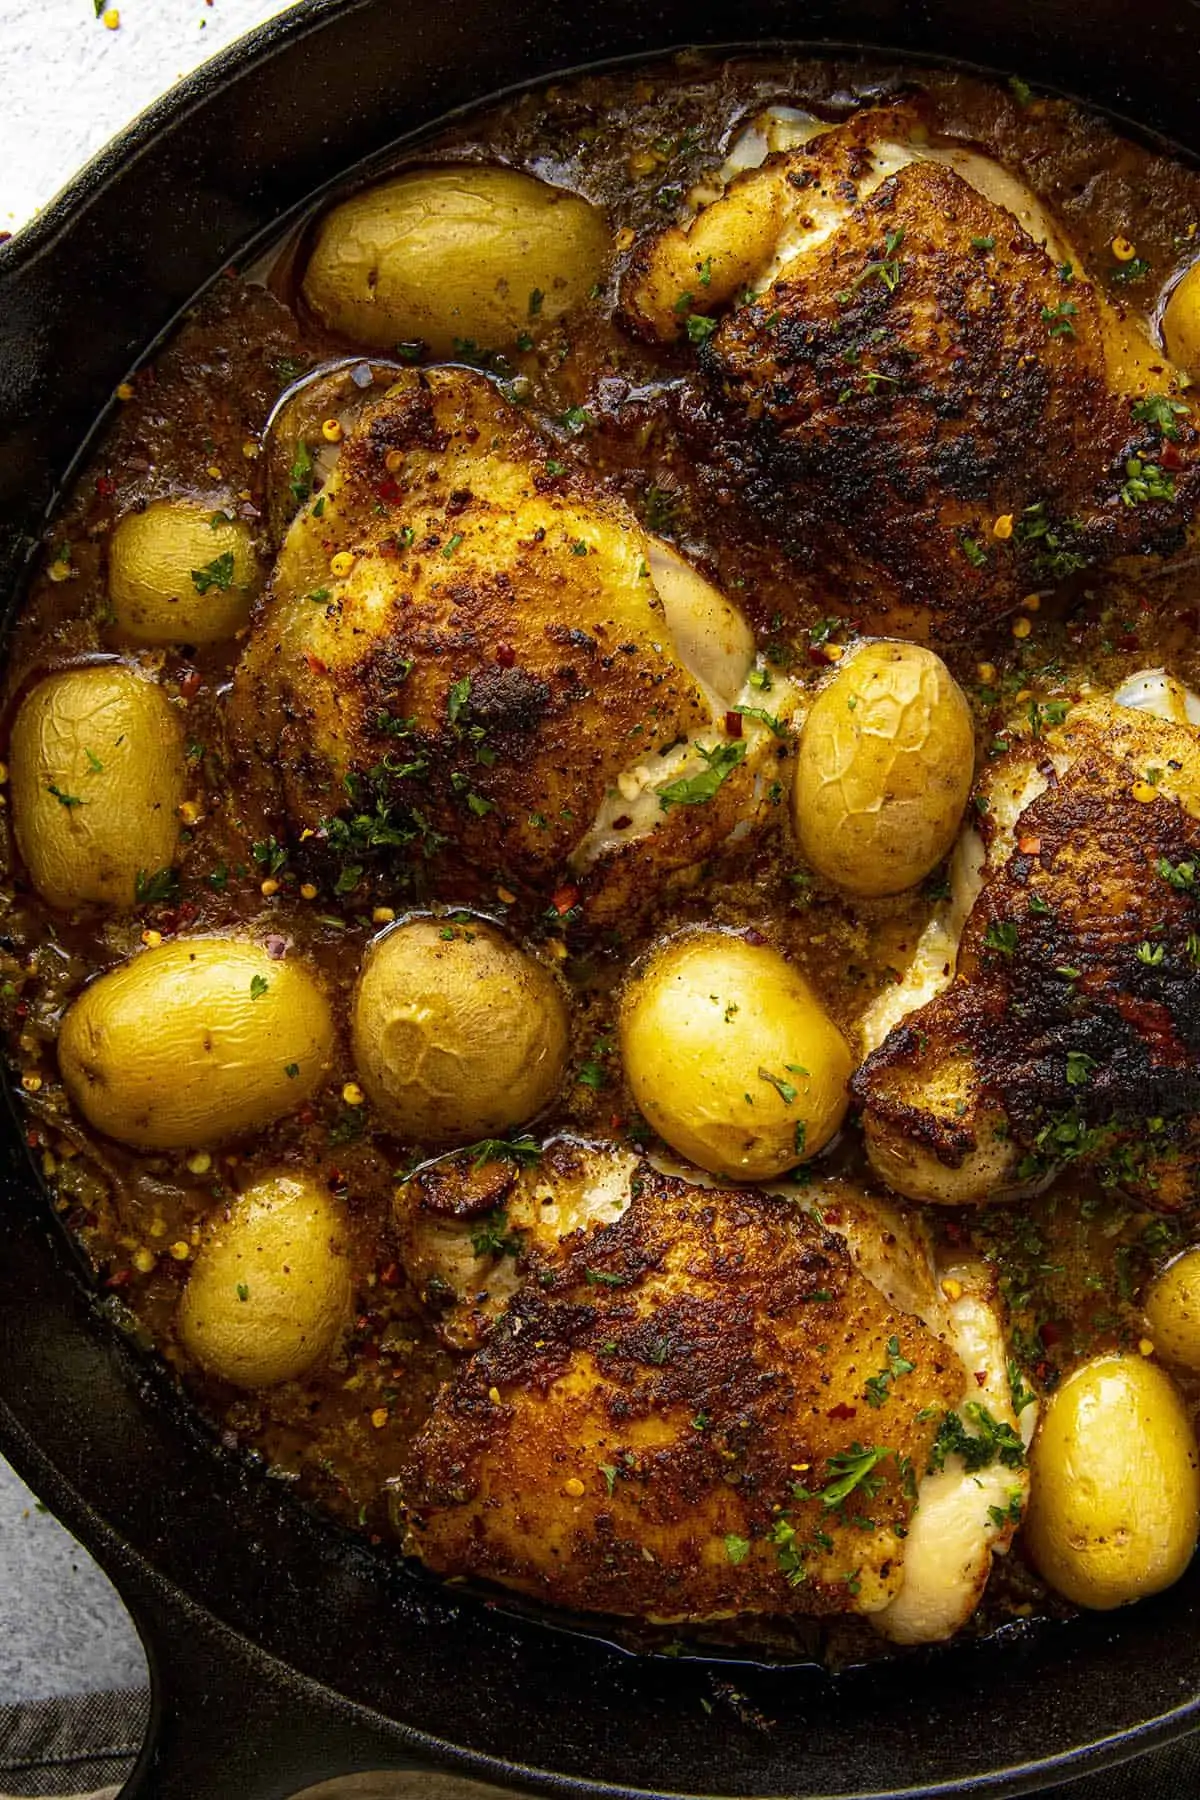 Spicy Baked Chicken Thighs seasoned with Cajun seasonings in a hot pan with potatoes